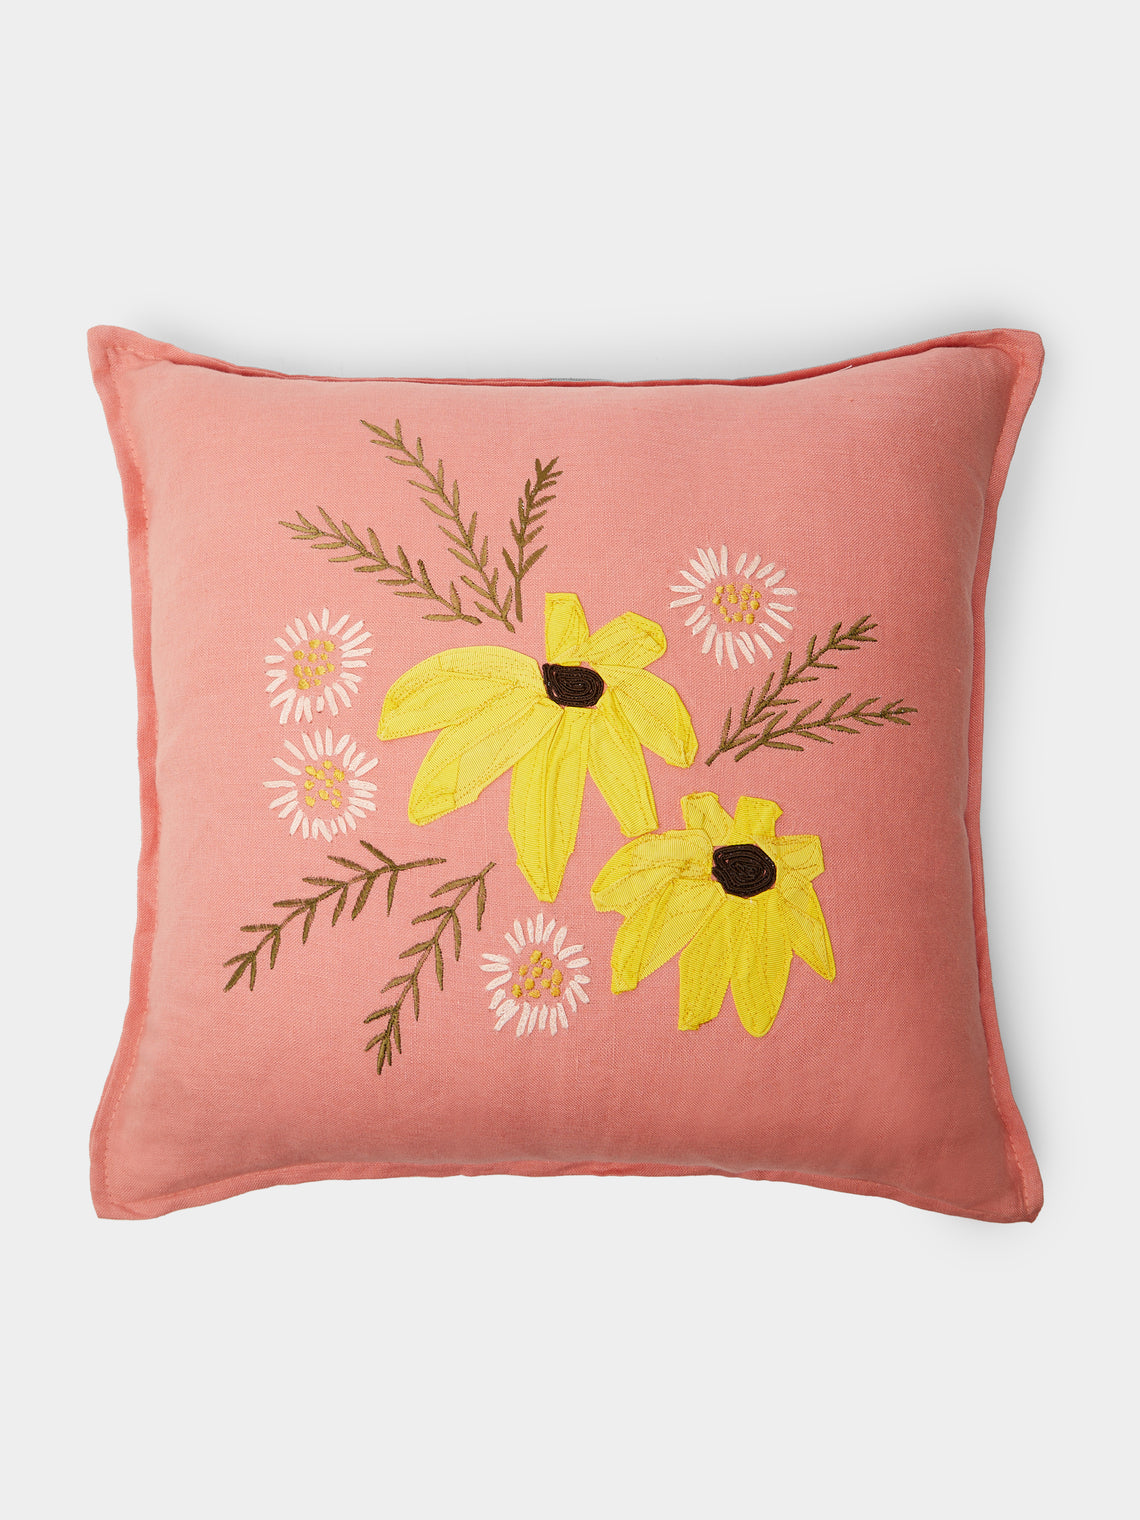 Lora Avedian - Bunch of Flowers Embroidered Linen Cushion -  - ABASK - 